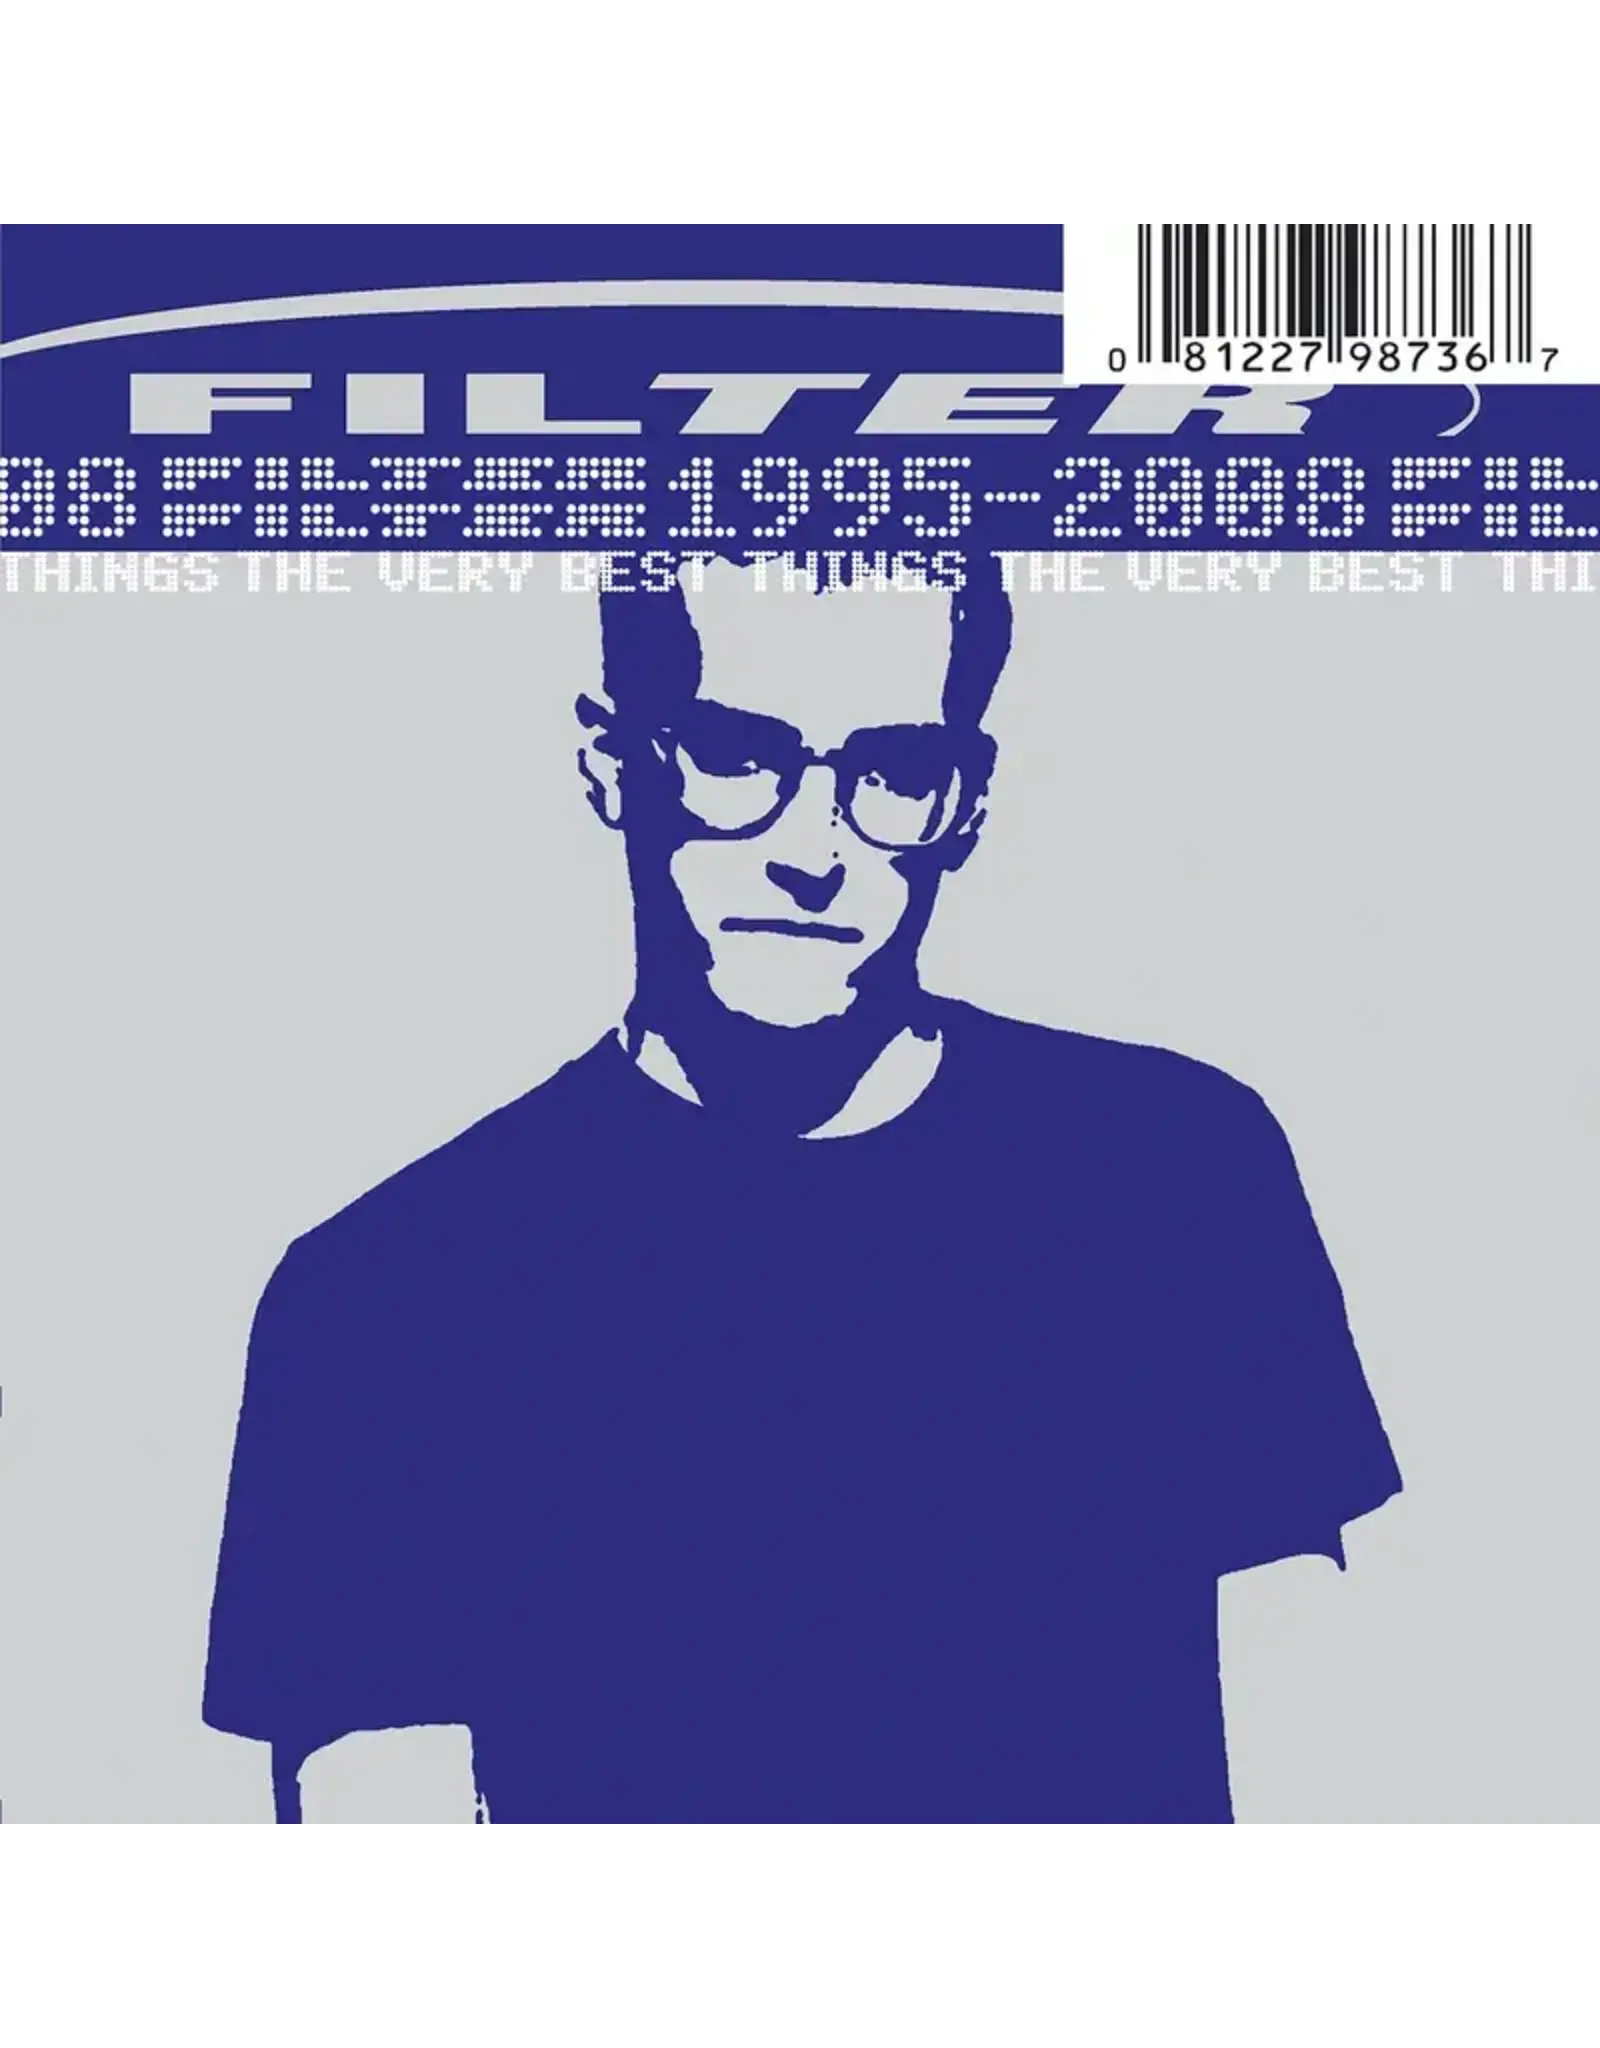 Filter - The Very Best Things: 1995-2008 (Record Store Day) [Silver Marbled Vinyl]